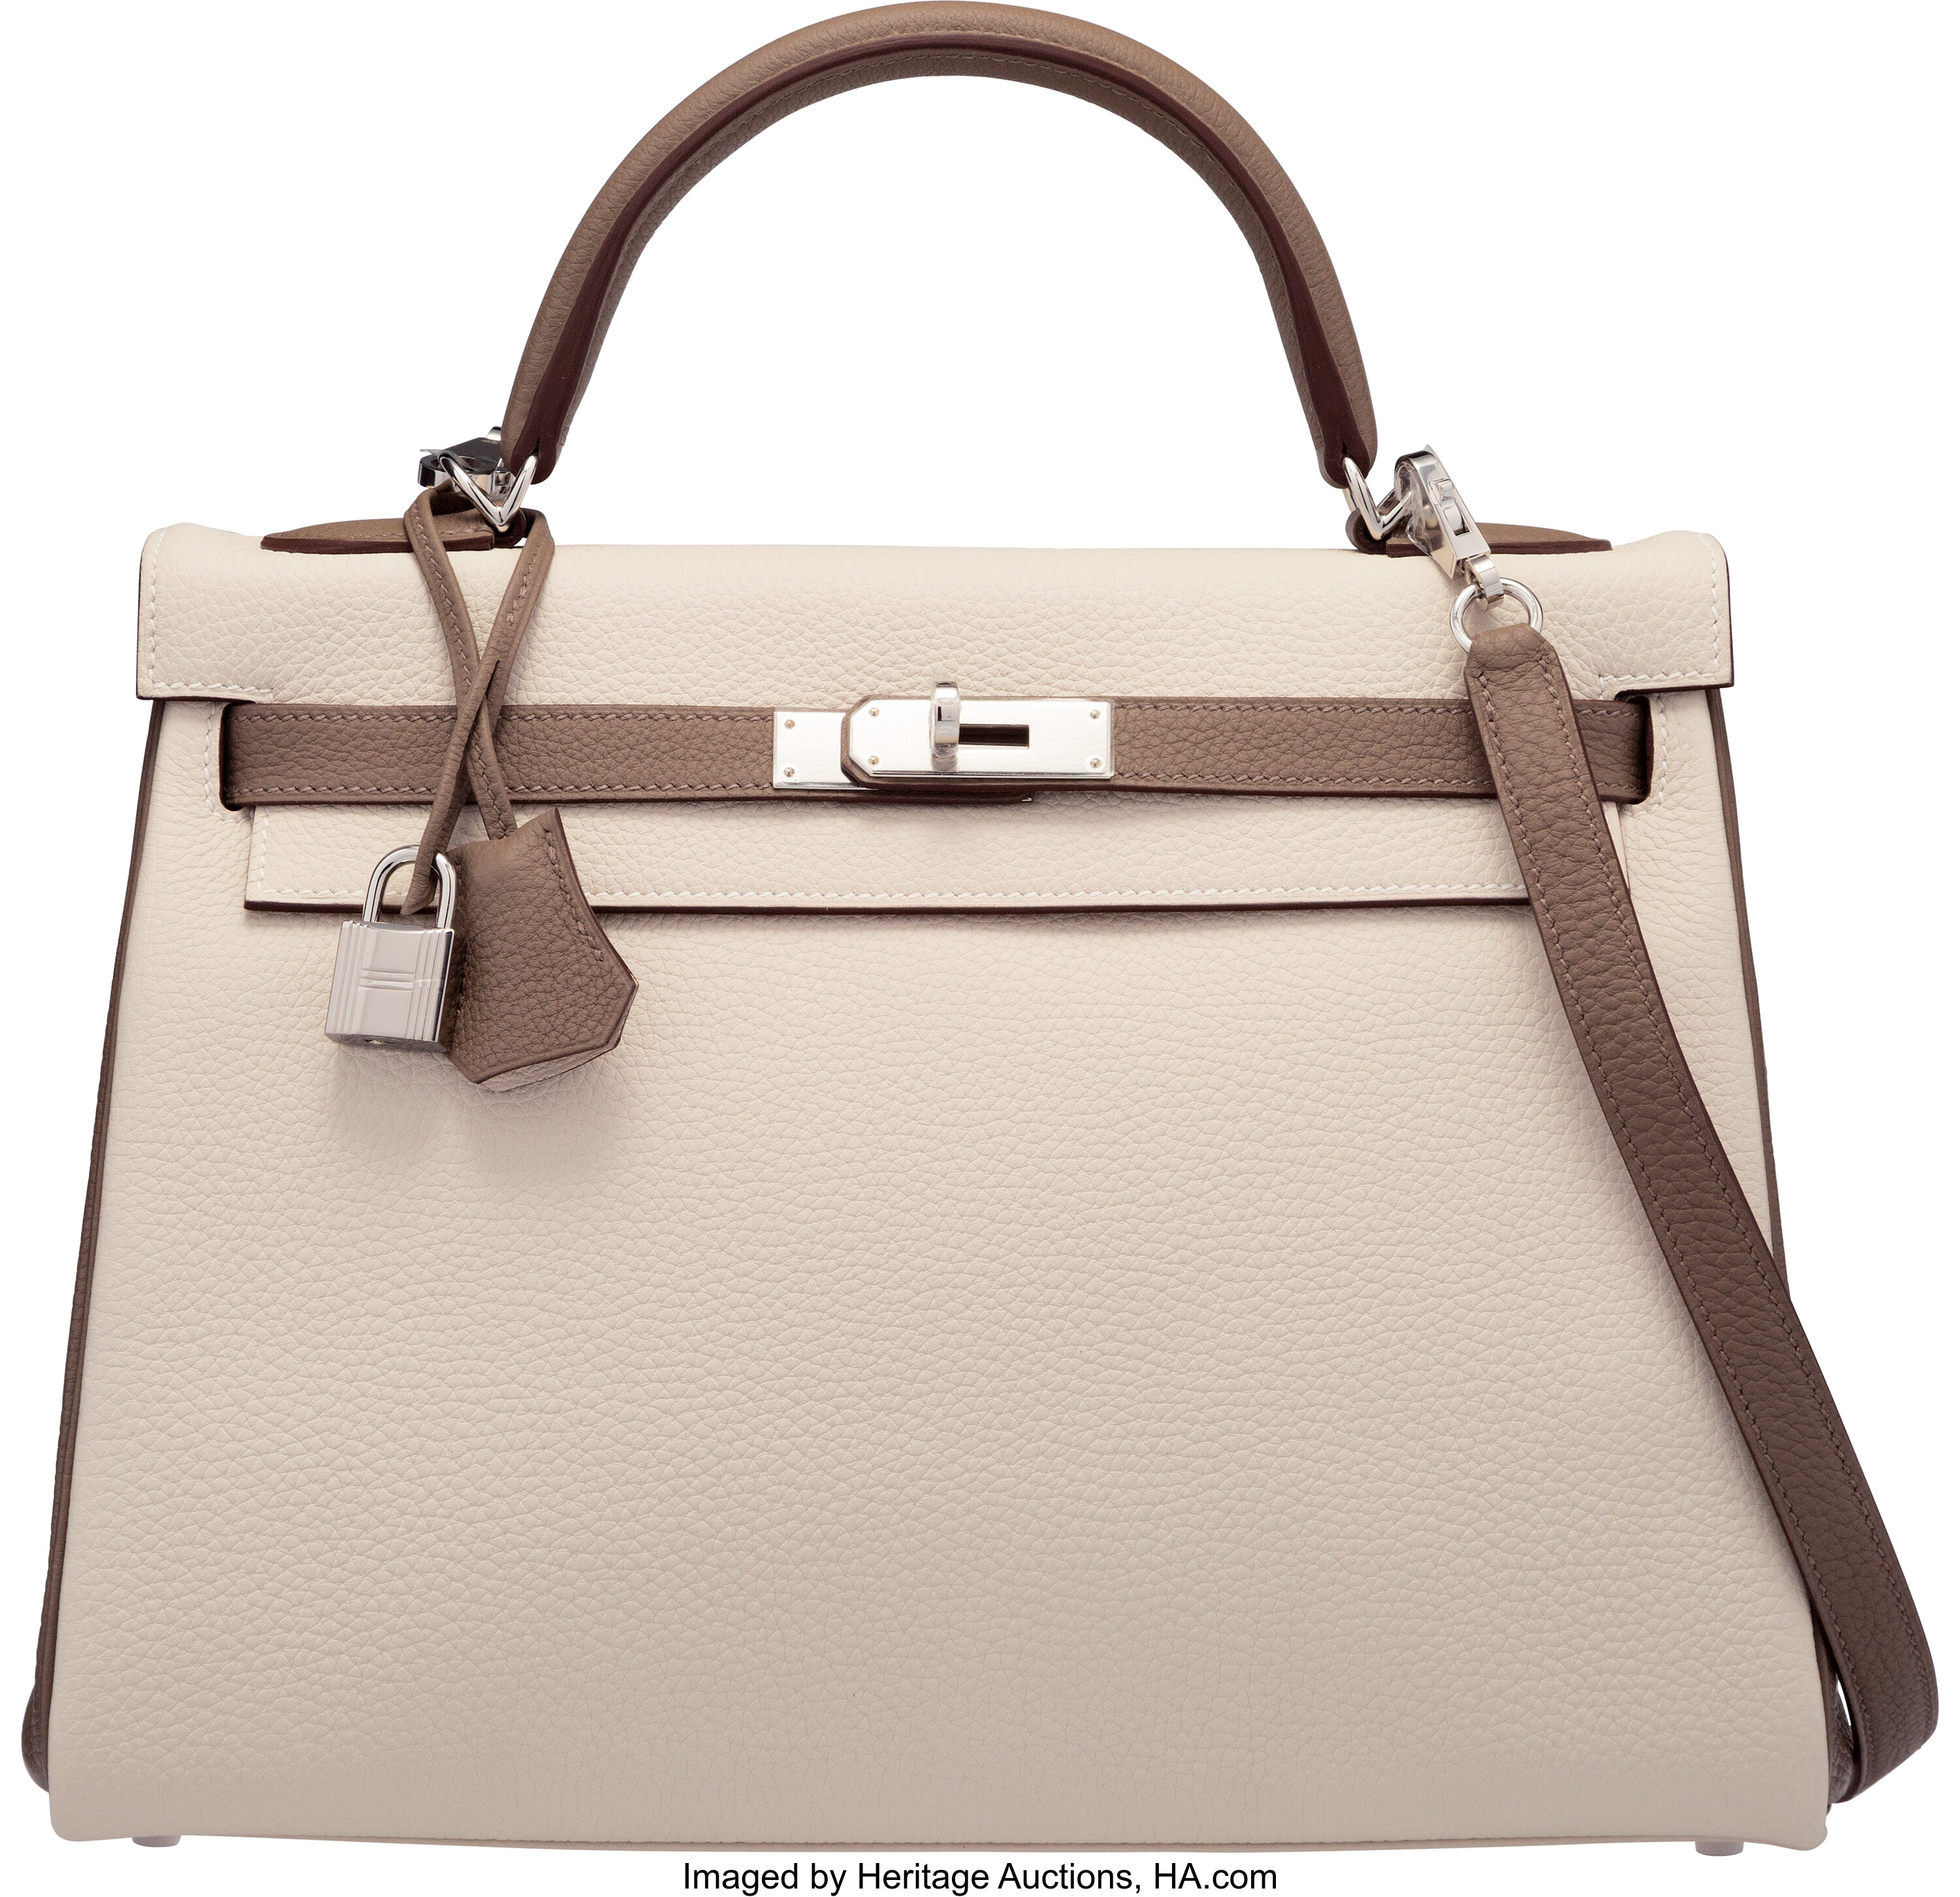 Hermes Kelly Bag 32cm HSS Taupe Anemone Special Order Horseshoe